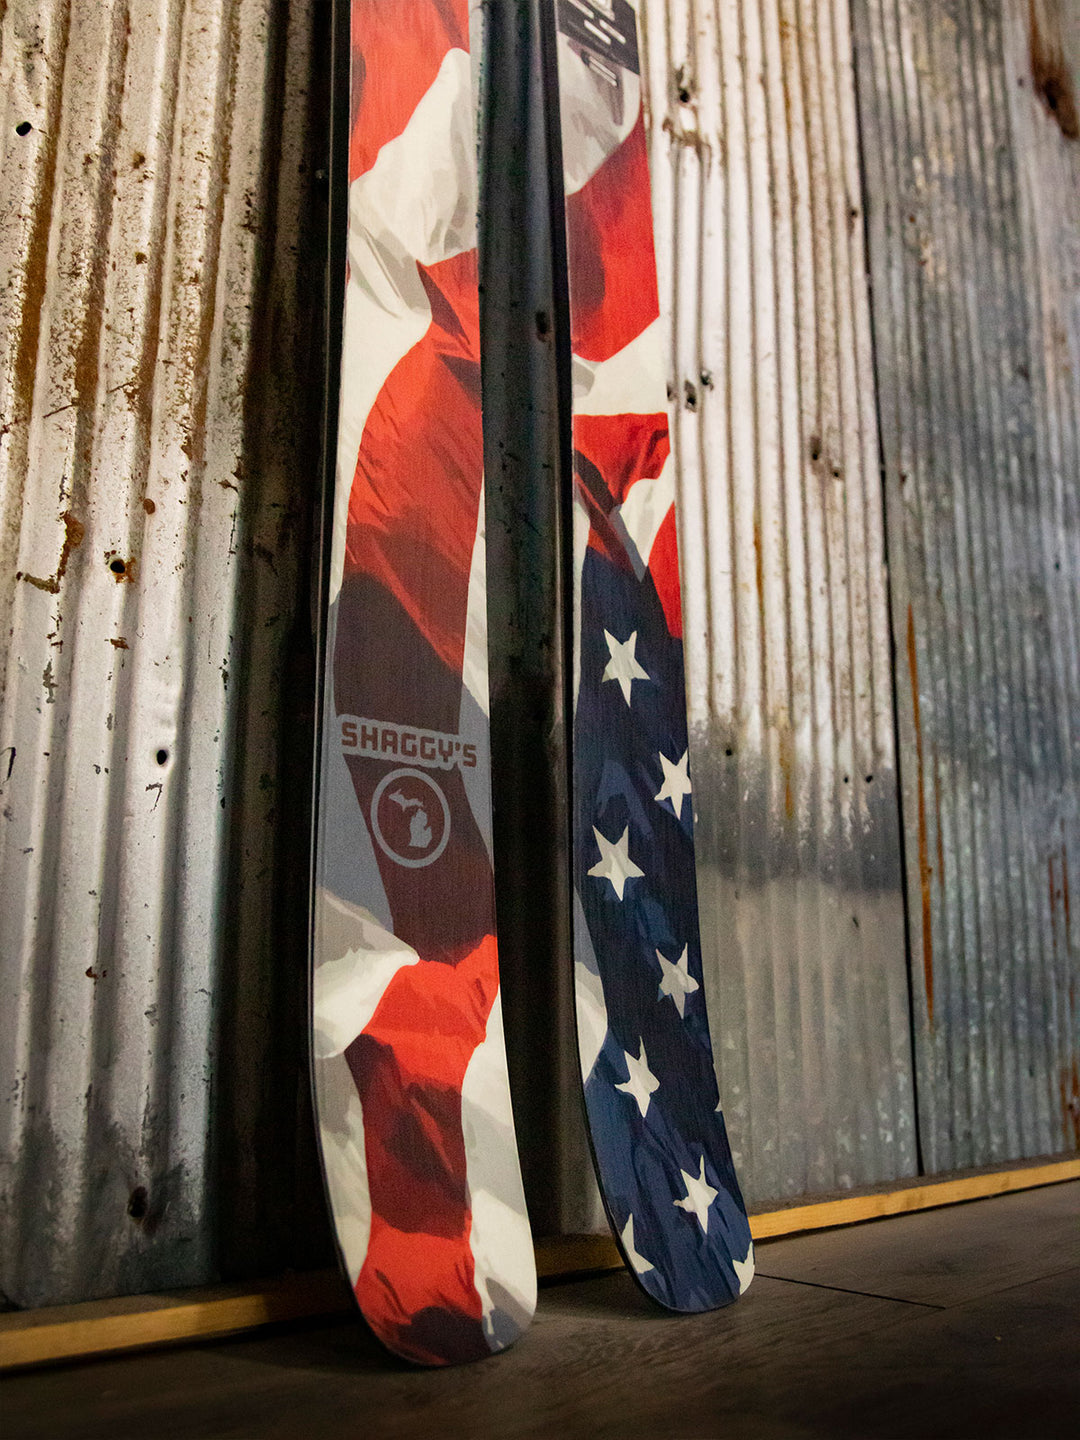 Limited Edition America! Skis